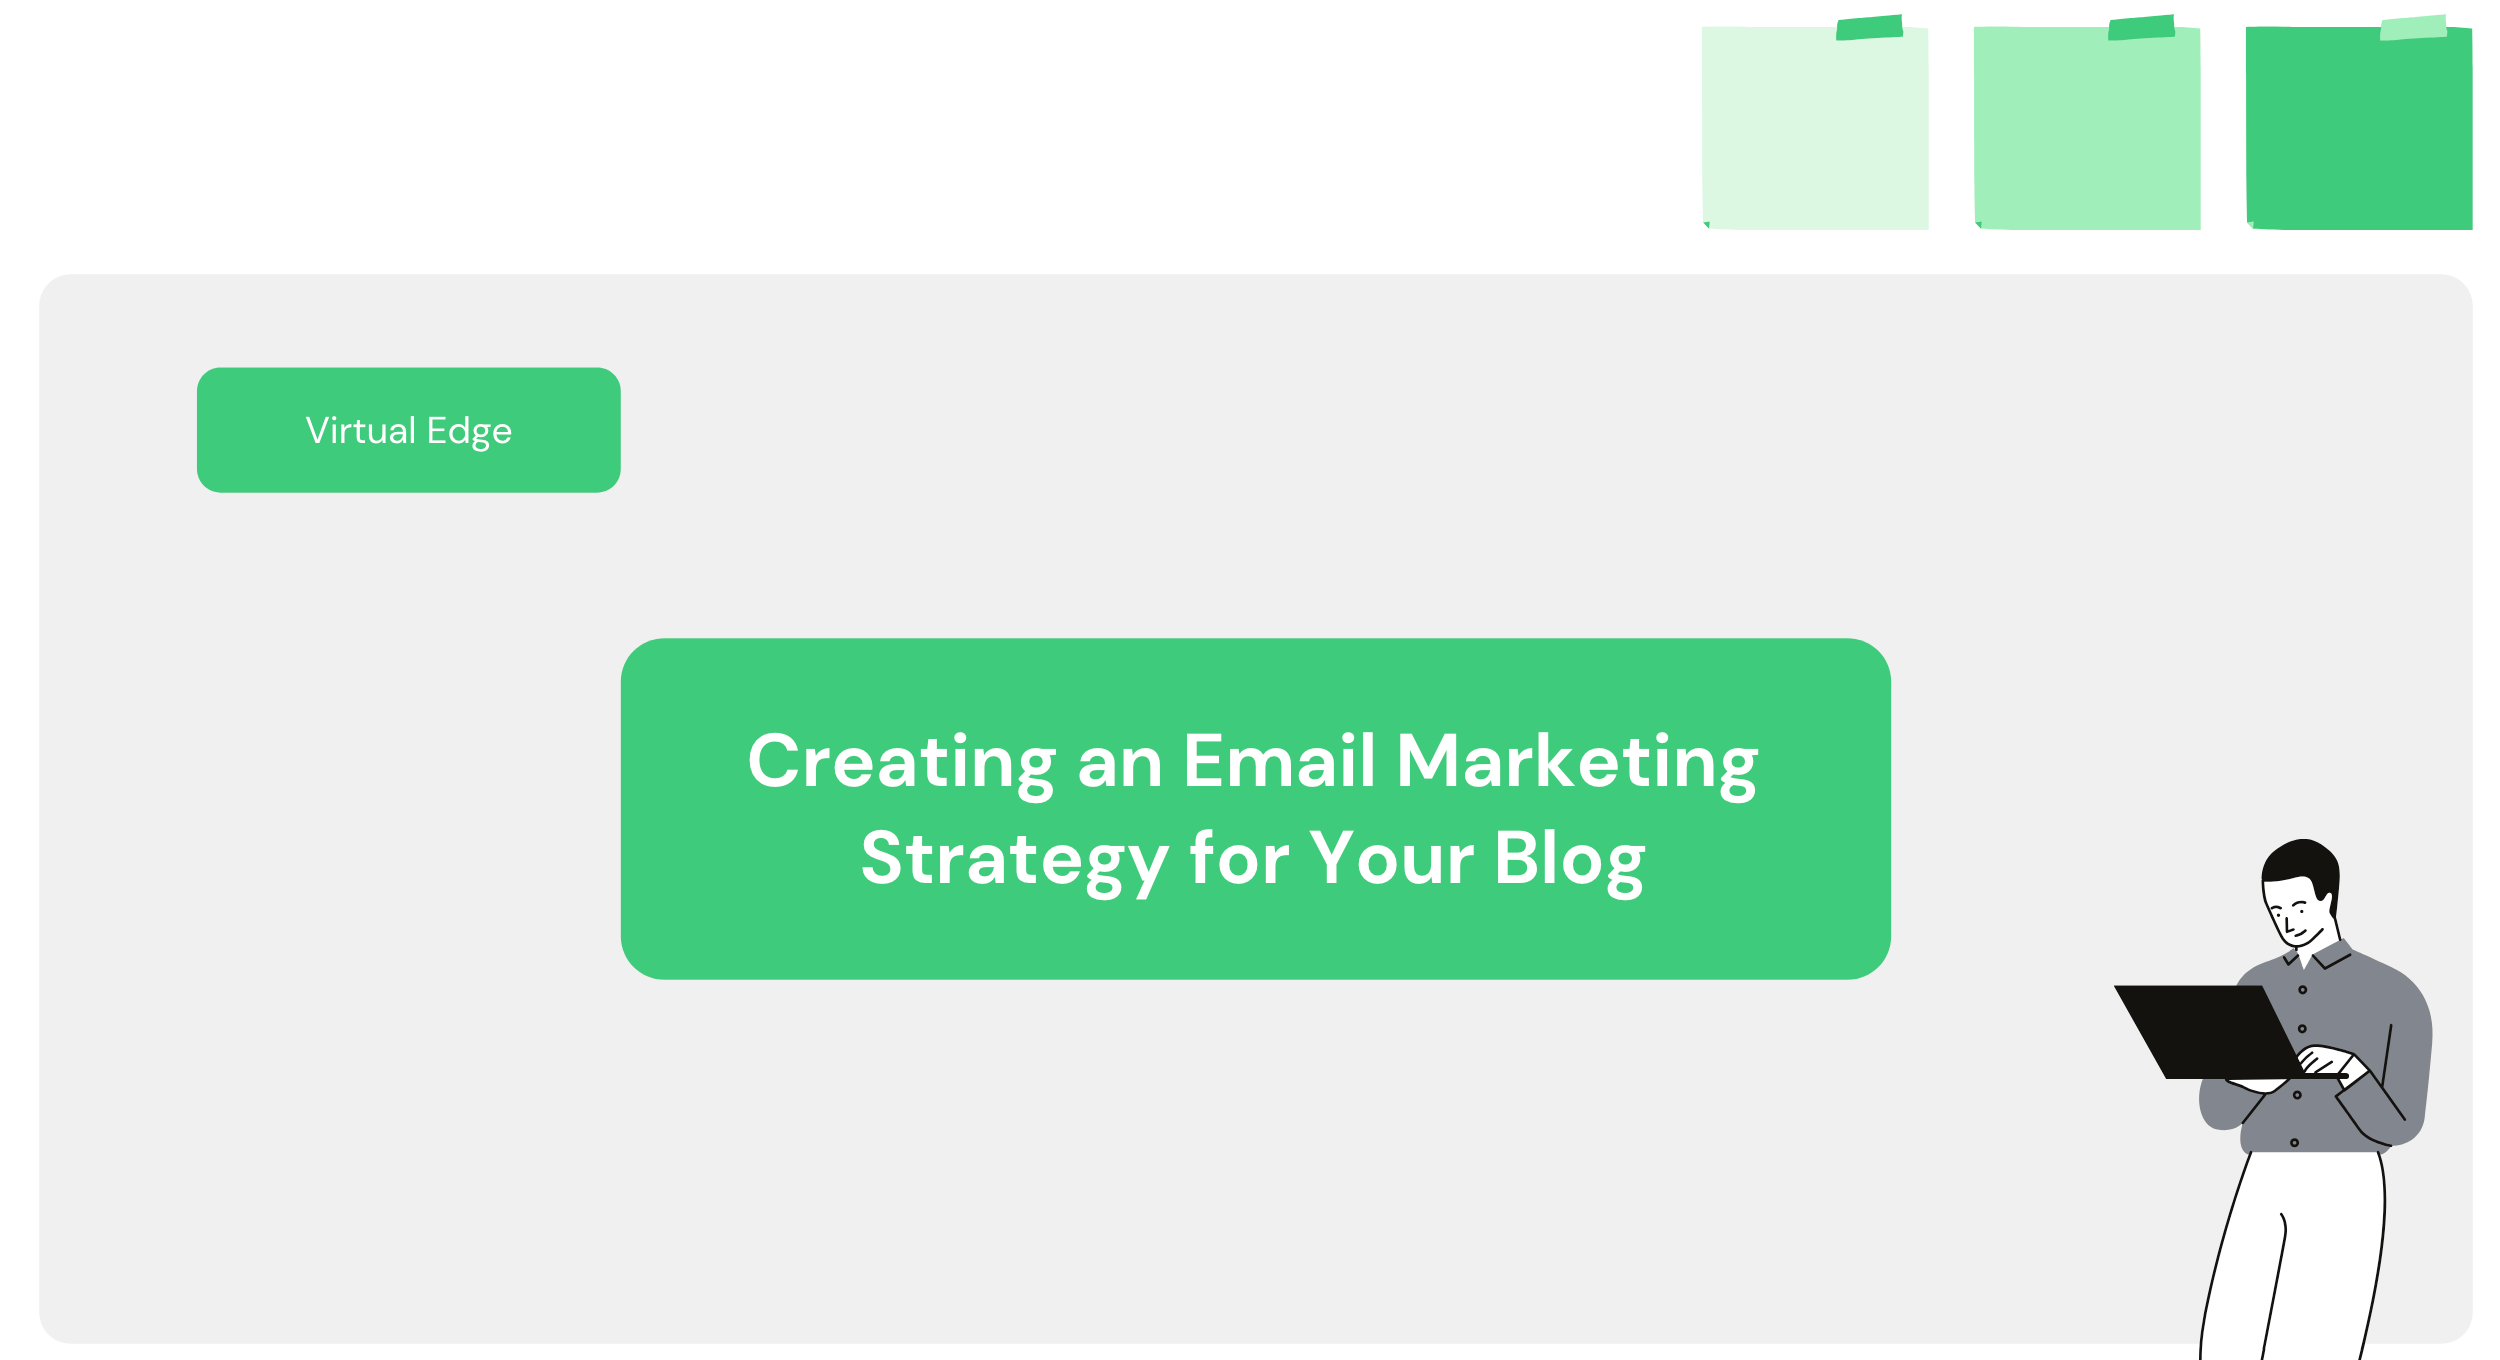 Creating an Email Marketing Strategy for Your Blog